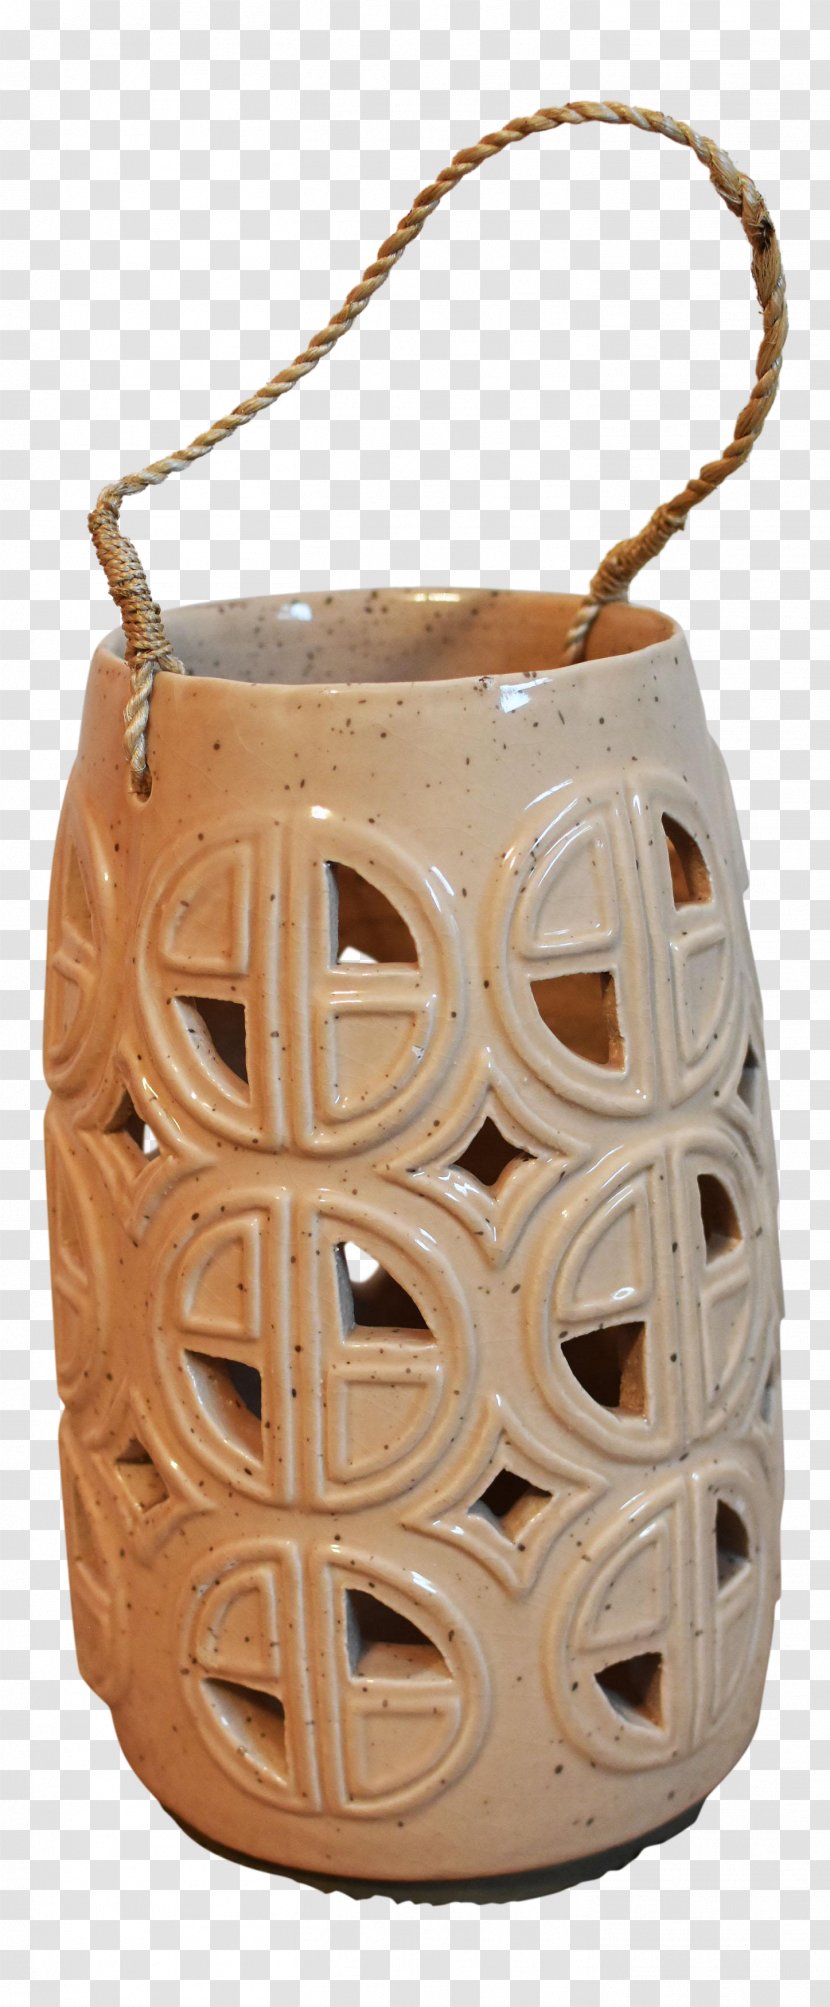 Earthenware Vase Pottery Chairish - Hand-painted Leaning Tower Of Pisa Transparent PNG